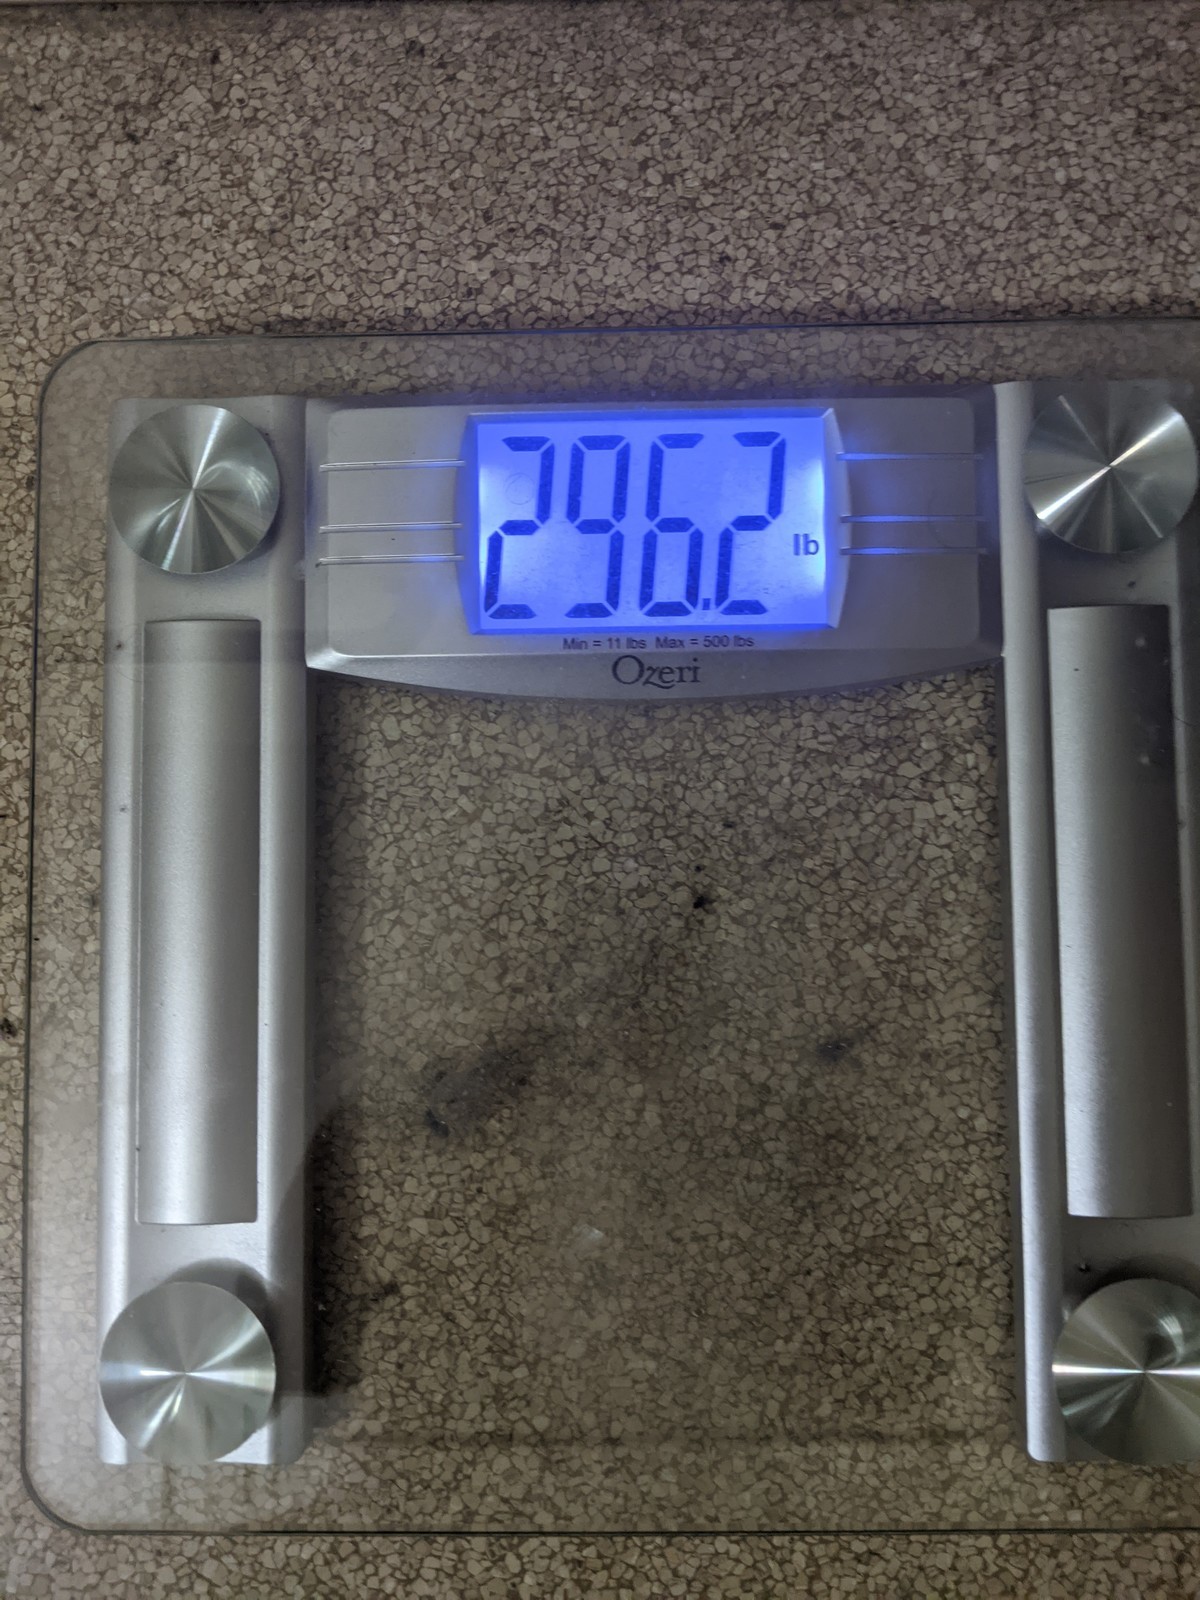 April 2021 weight log. join list: WeightlossProgress (169 subs)Mention History Late update this month, I kept fluctuating wildly and didn't want to put one up t